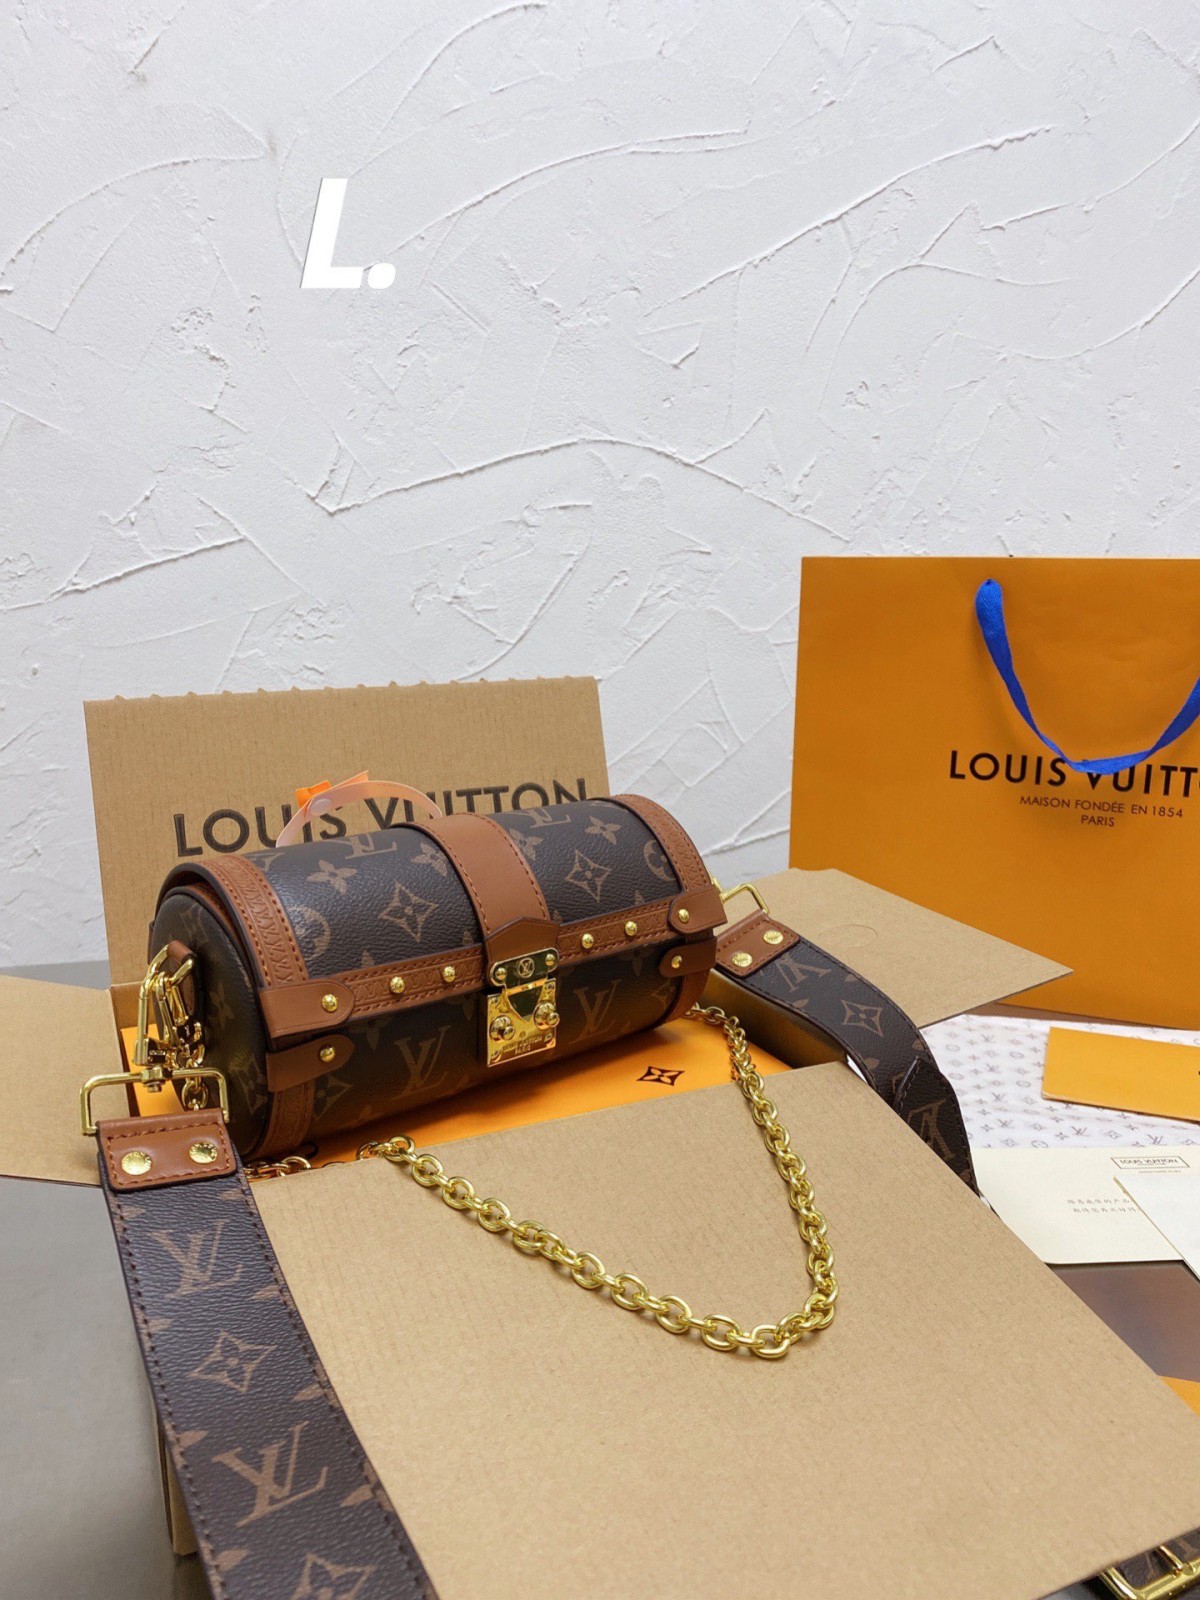 How is the quality of Louis Vuitton PAPILLON TRUNK replica bags? (2022 updated)-Best Quality Fake Louis Vuitton Bag Online Store, Replica designer bag ru